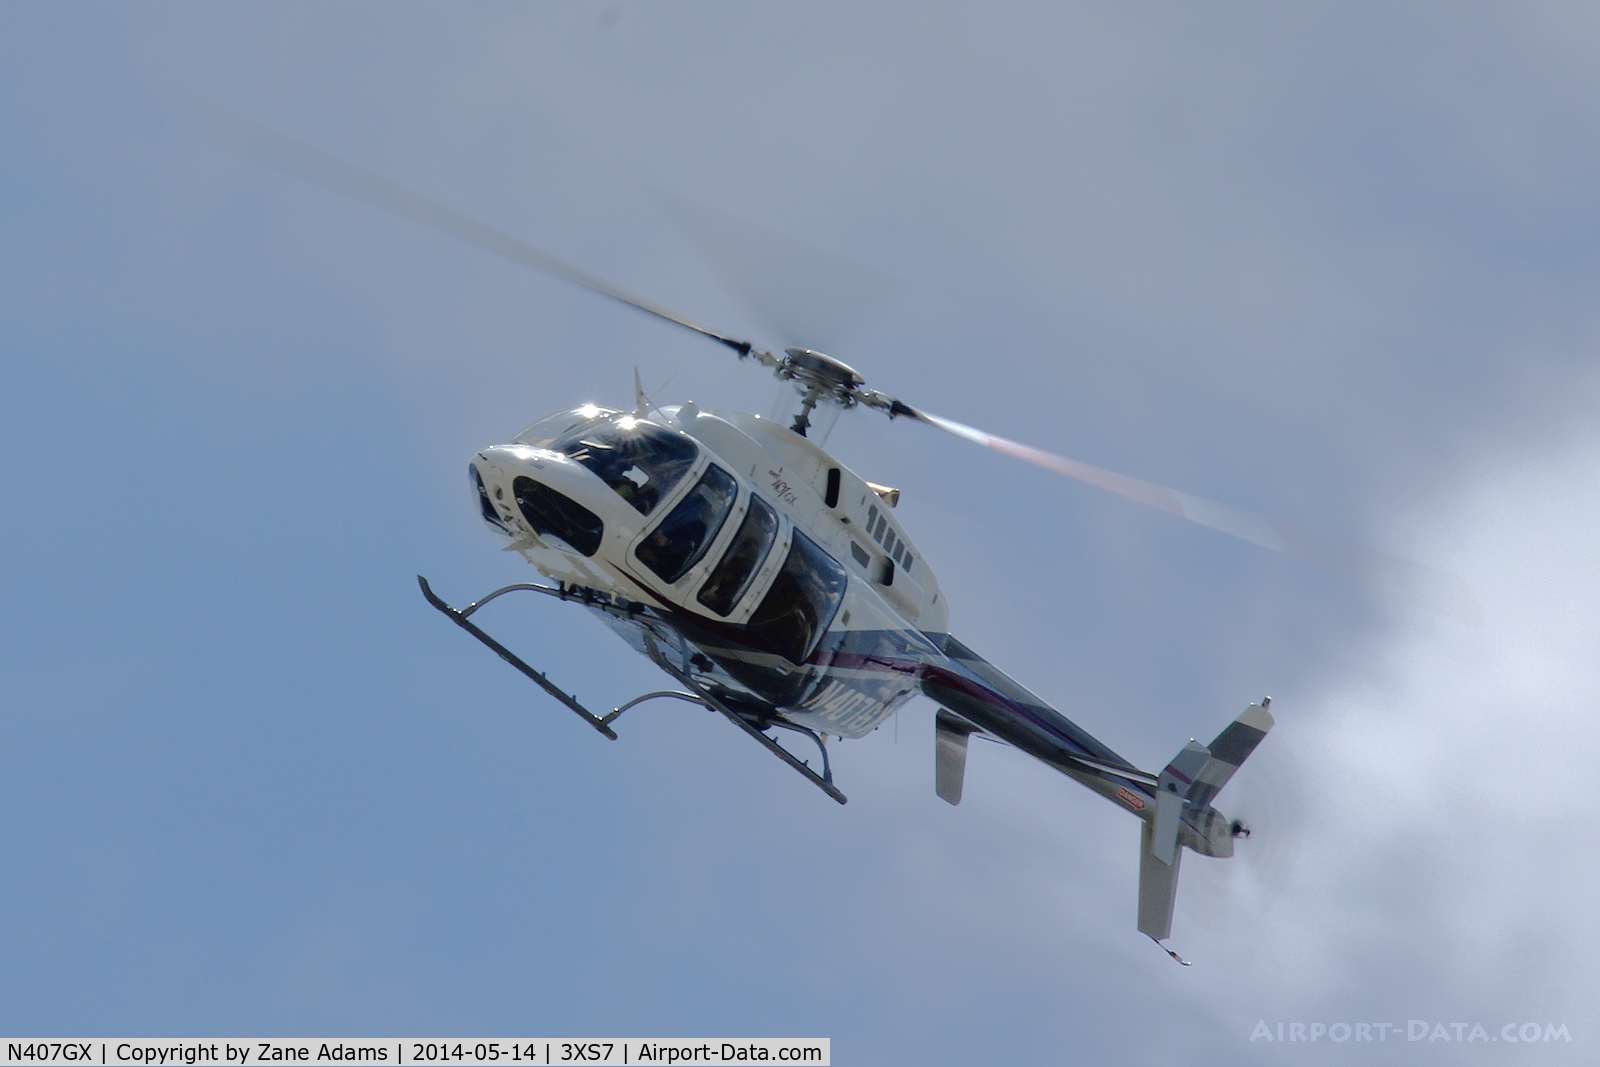 N407GX, 2010 Bell 407 C/N 54300, Flying at the Bell Helicopter Training Facility - Fort Worth, TX